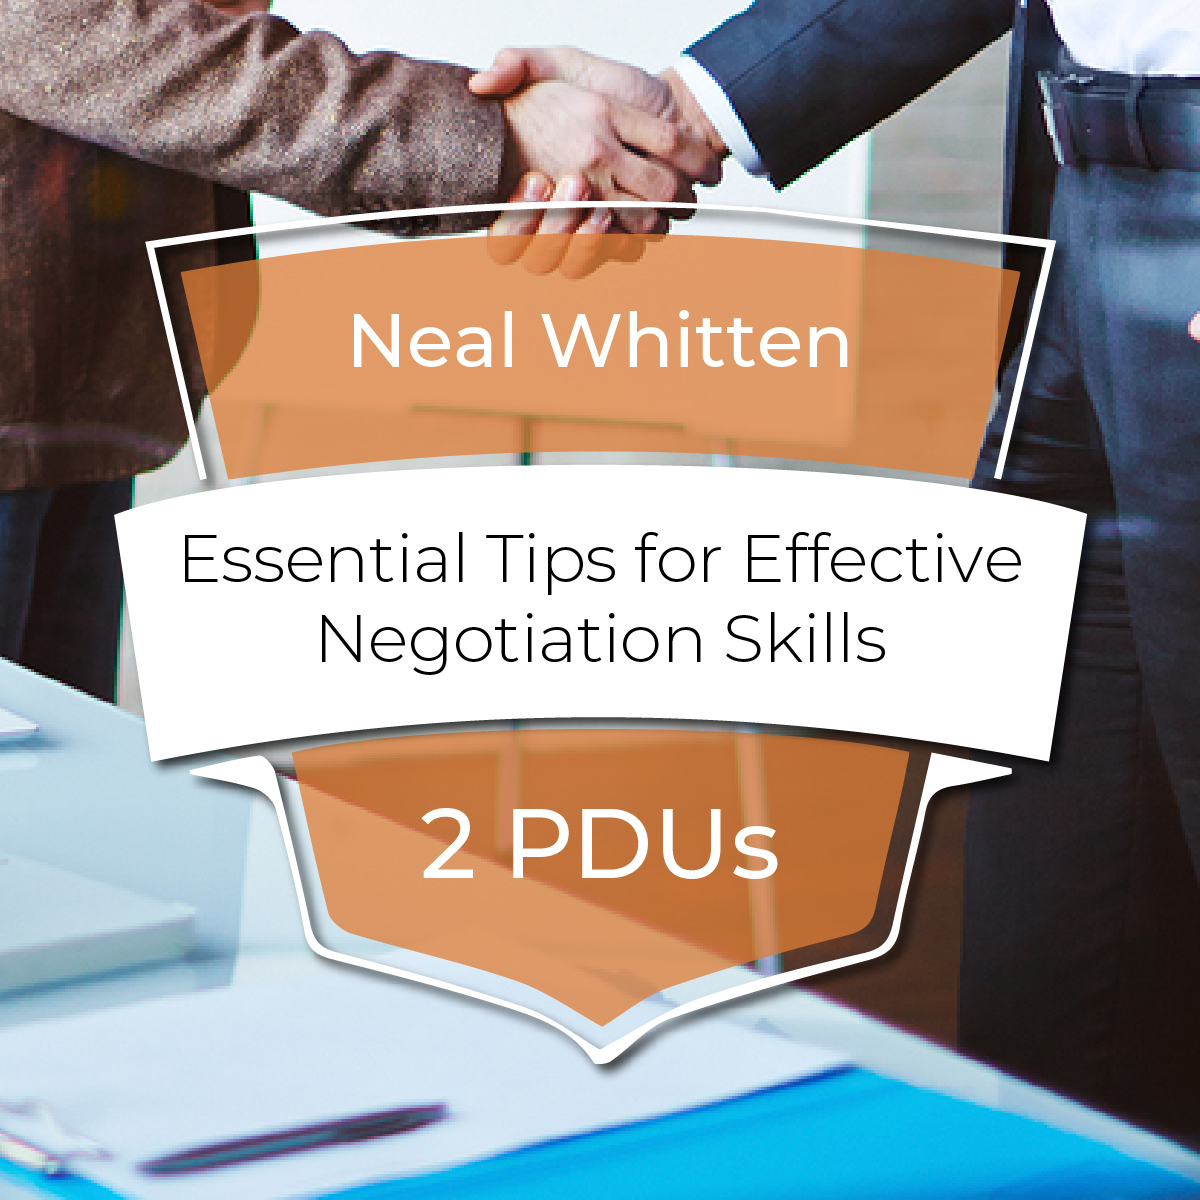 Essential Tips for Effective Negotiation Skills